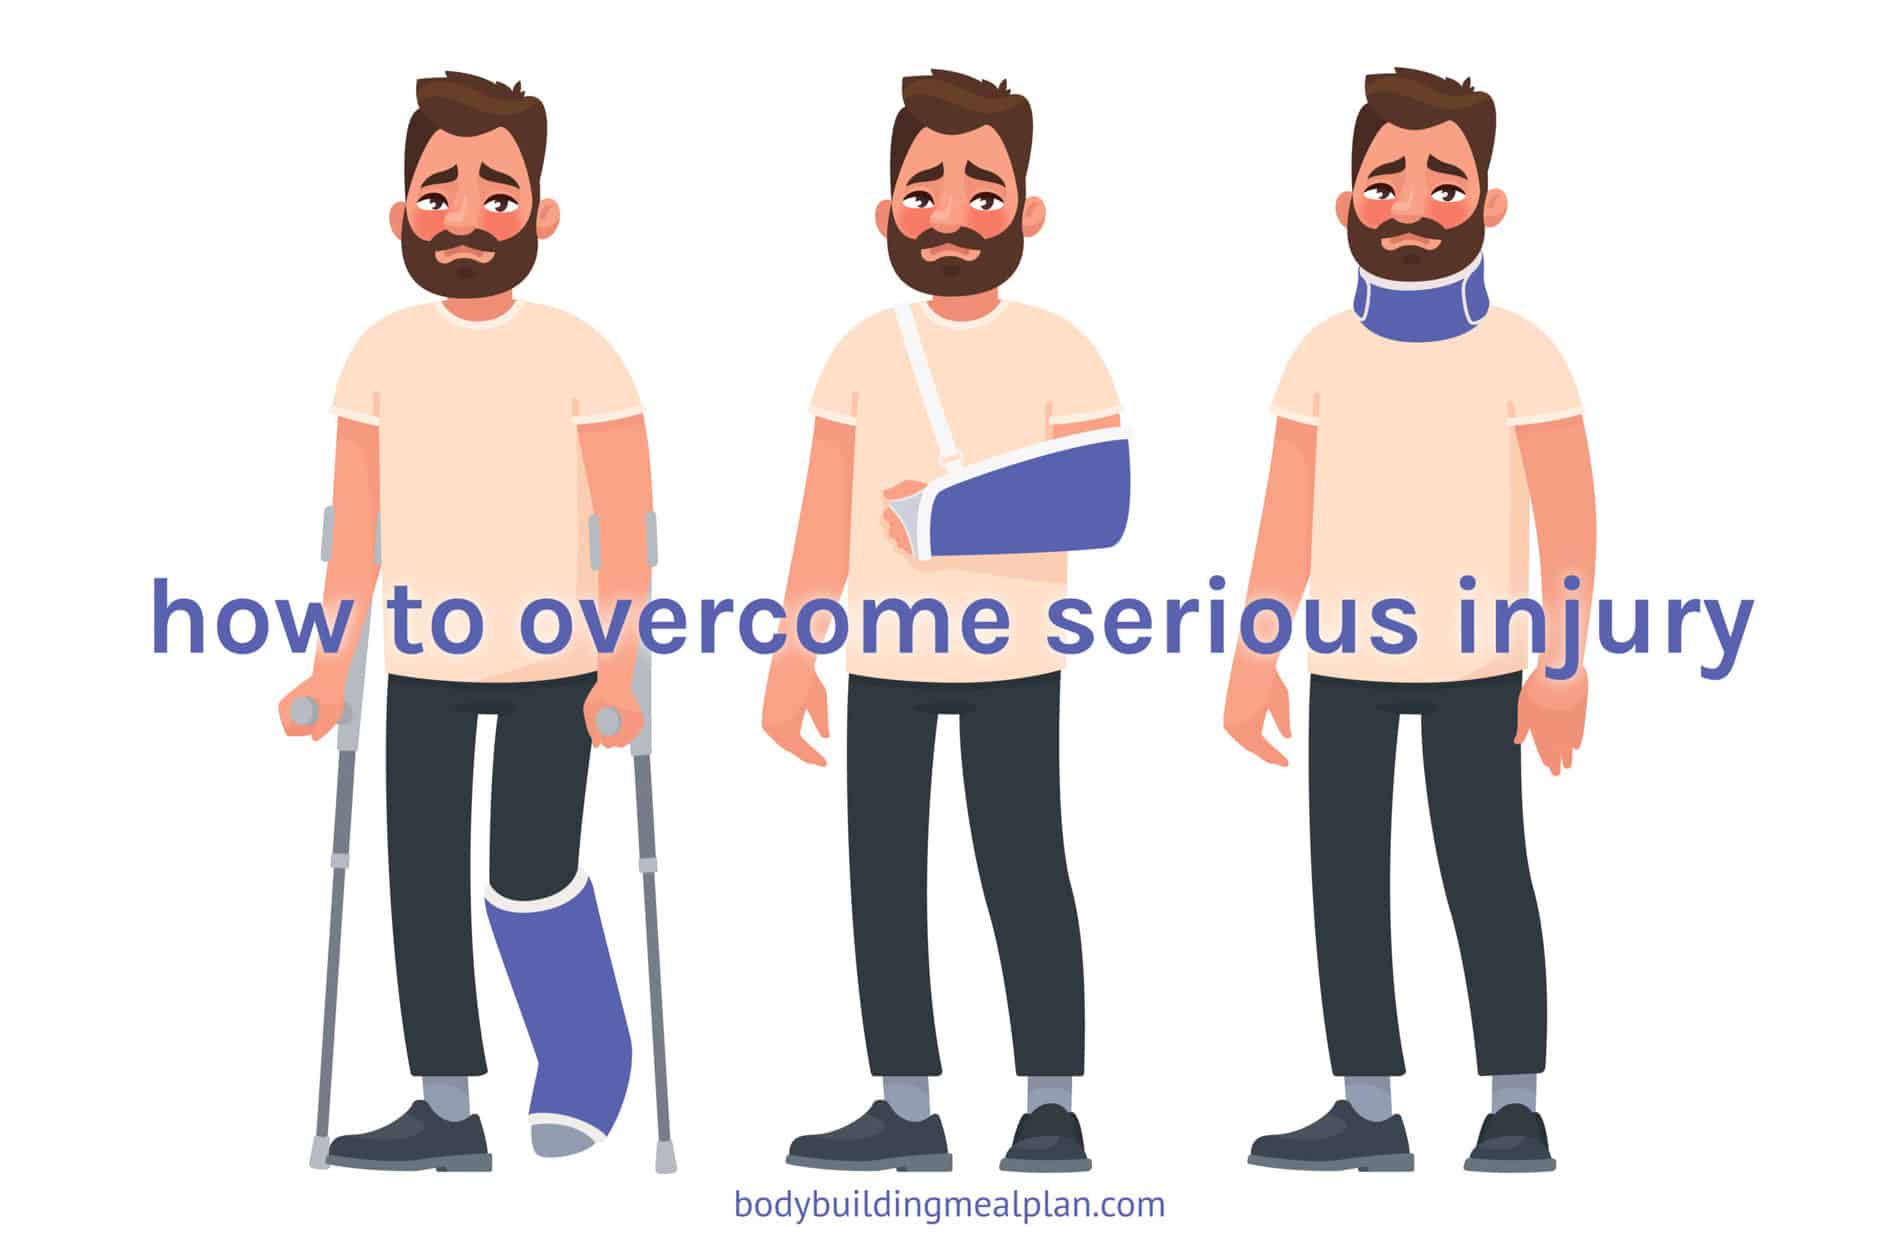 How To Overcome Serious Injury